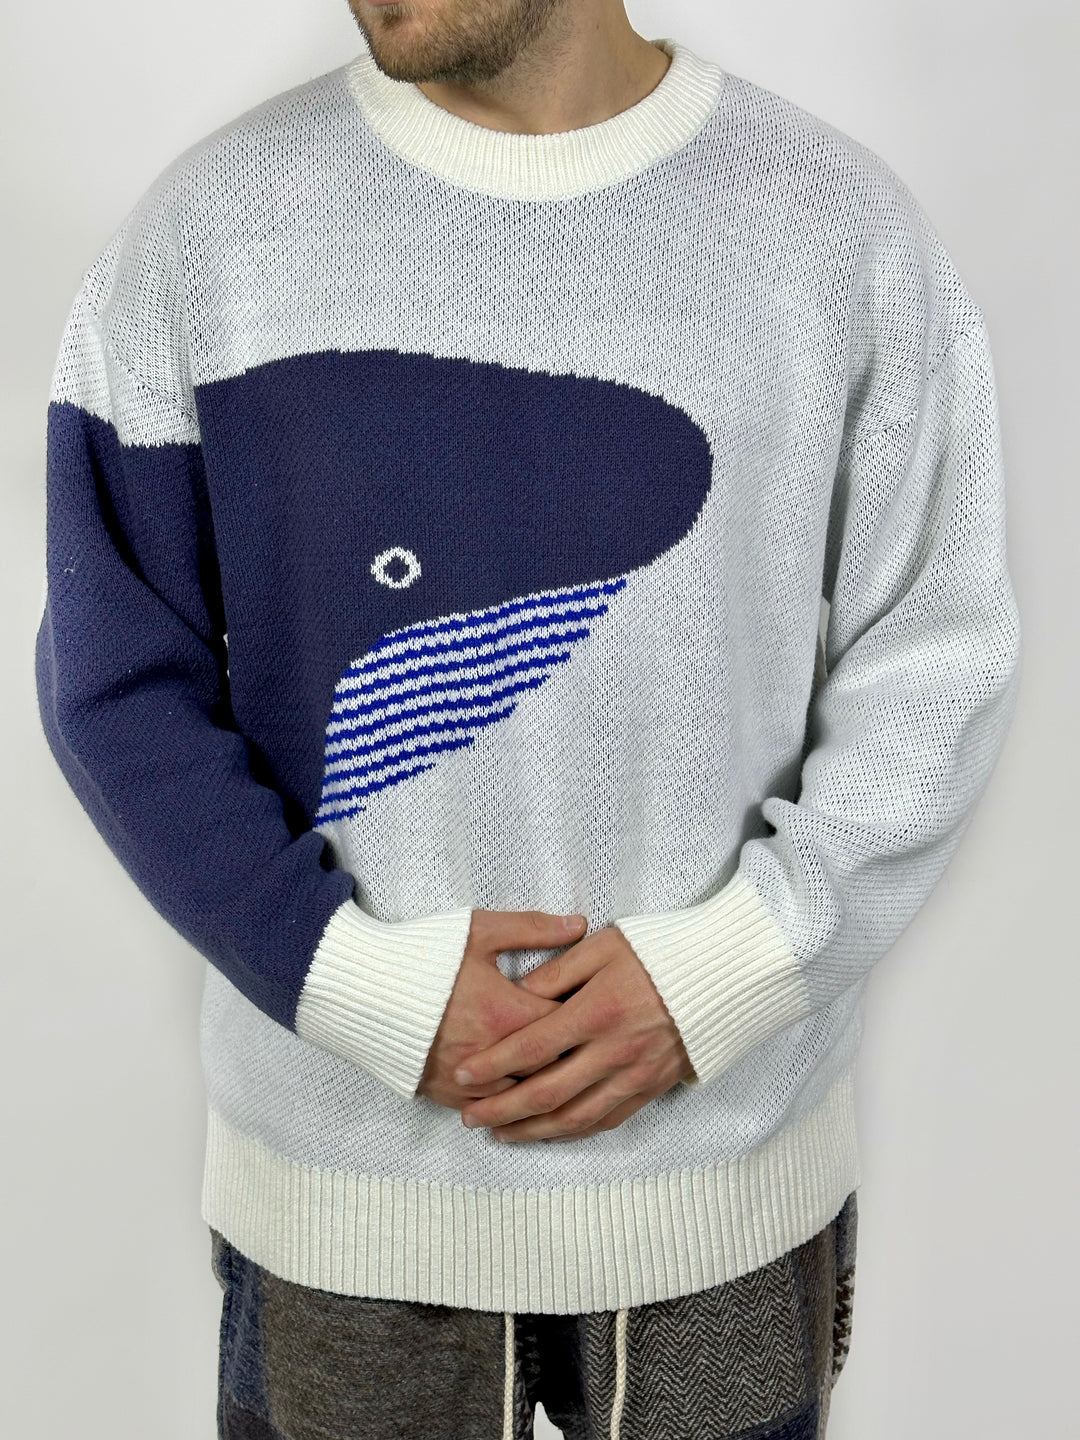 Whale Knitted Sweater - Unisex